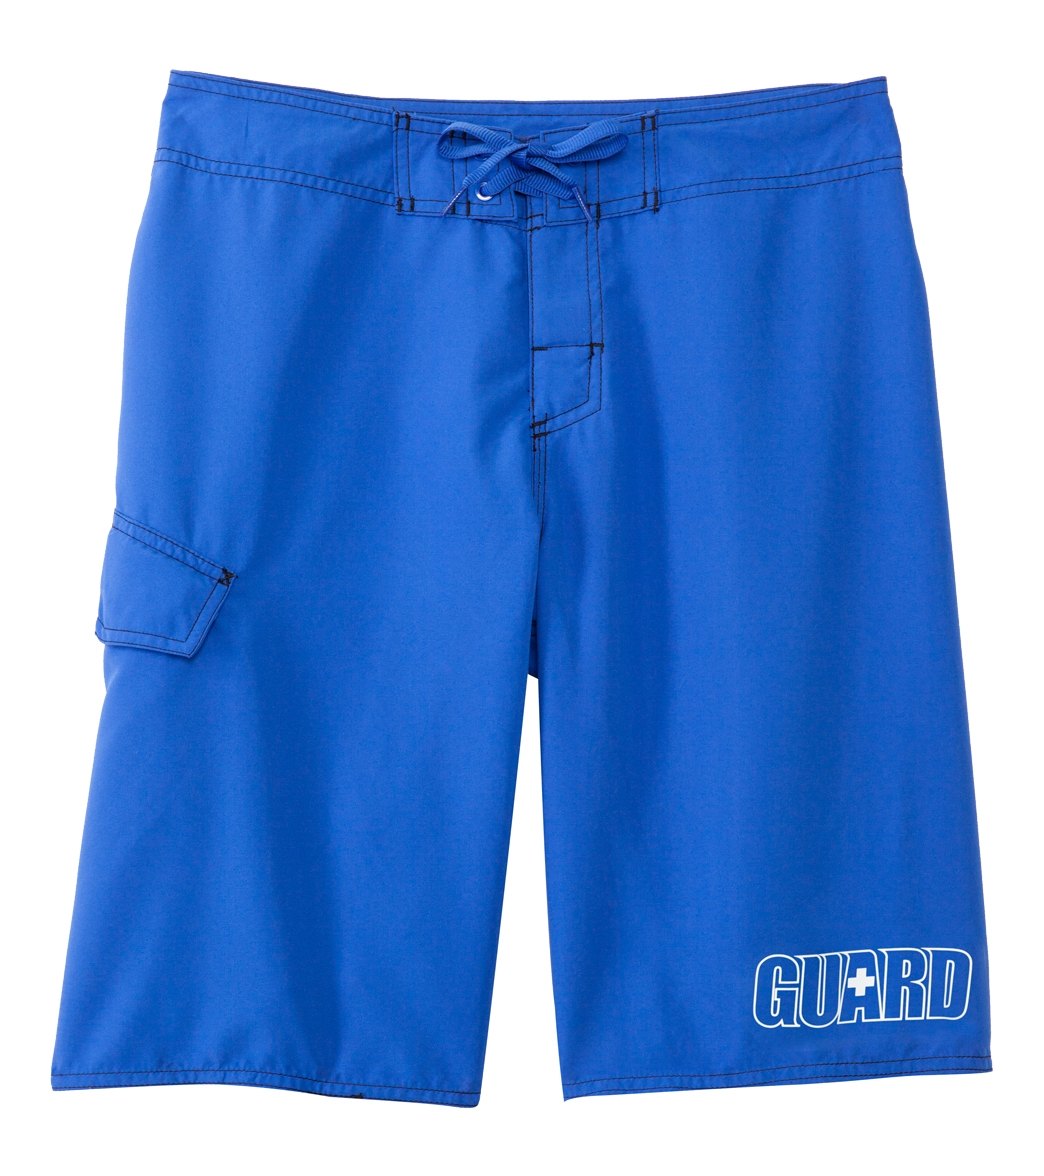 Dolfin Guard Fitted Board Short Swimsuit - Royal 36 Polyester - Swimoutlet.com